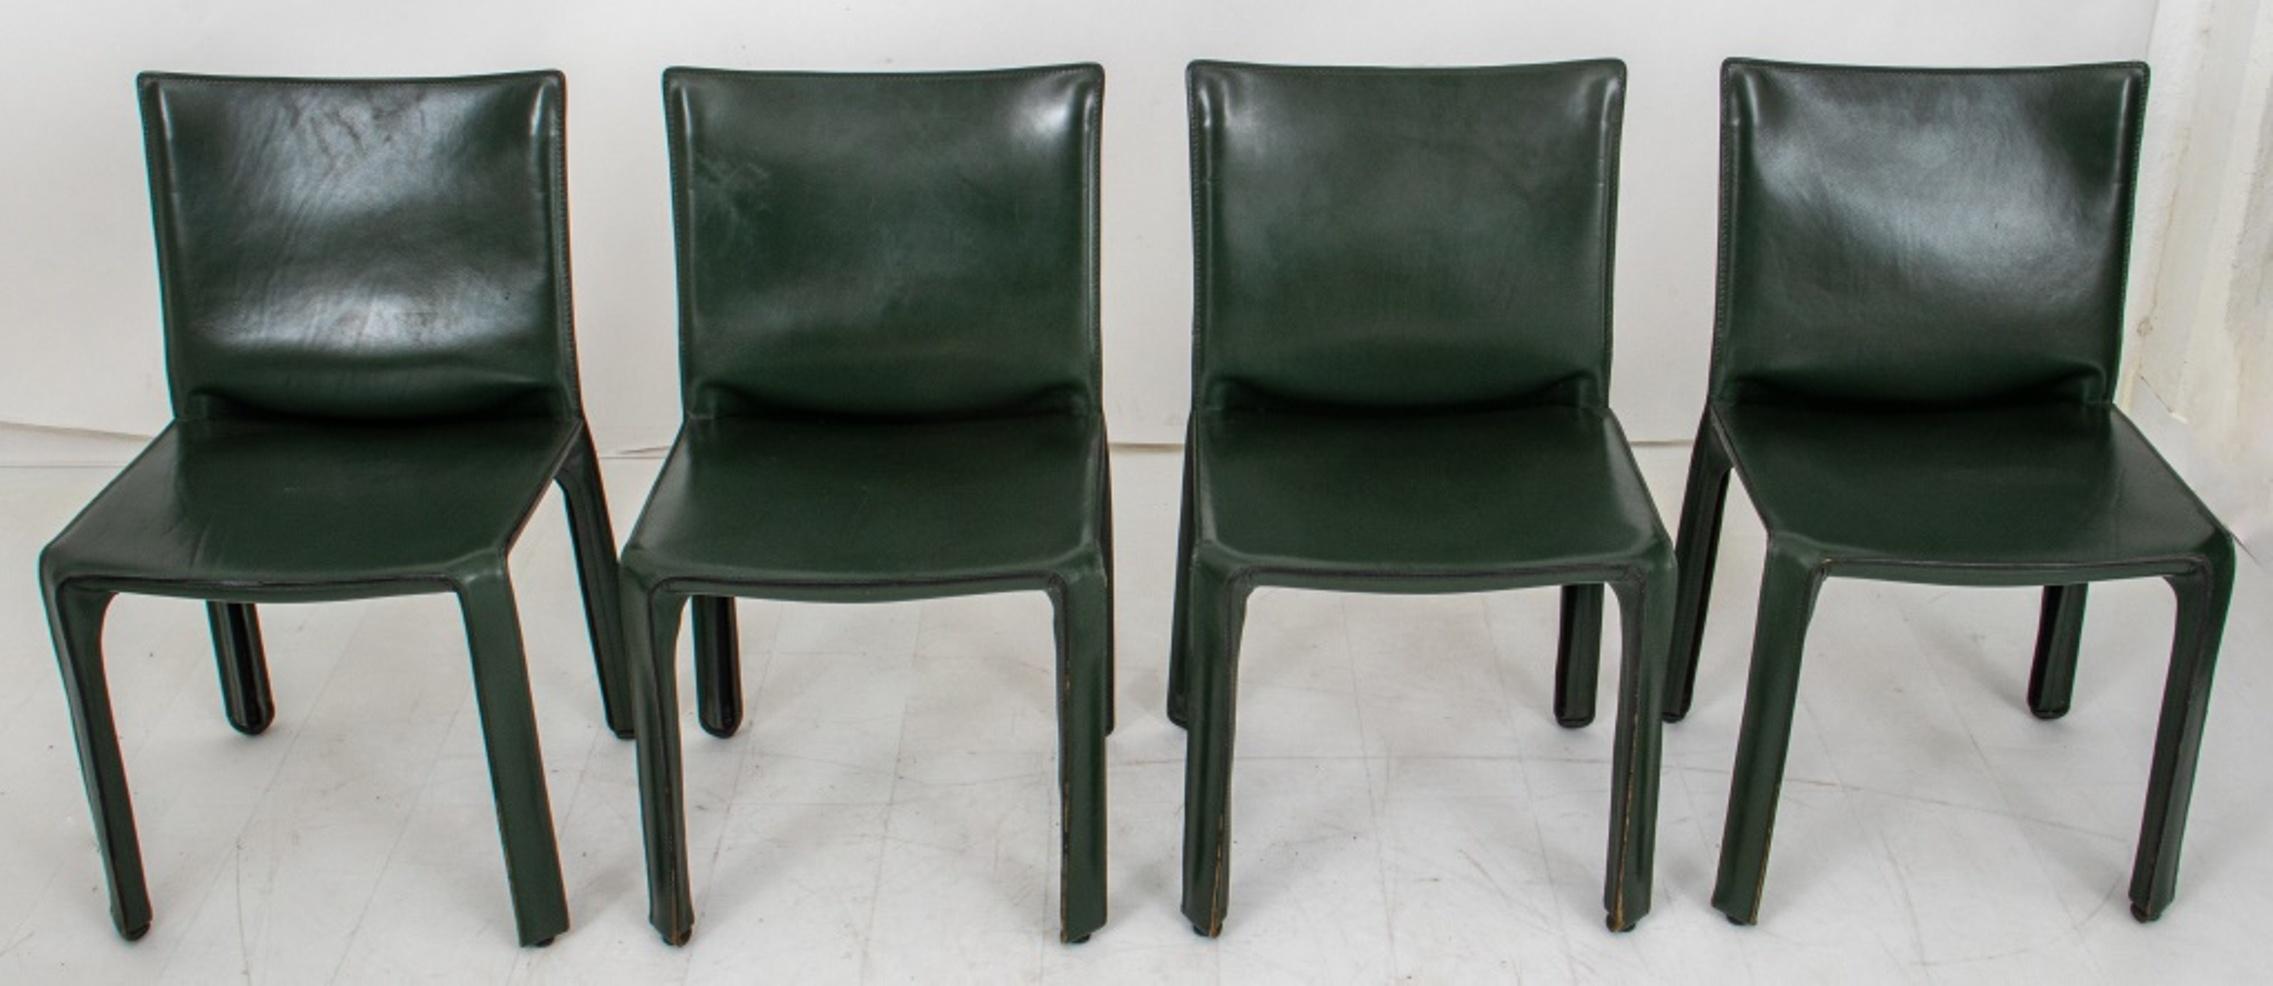 Mario Bellini (Italian, b. 1939)  for Cassina Cab 412  Side Chairs, 4, in deep green leather.

Dimensions: 31